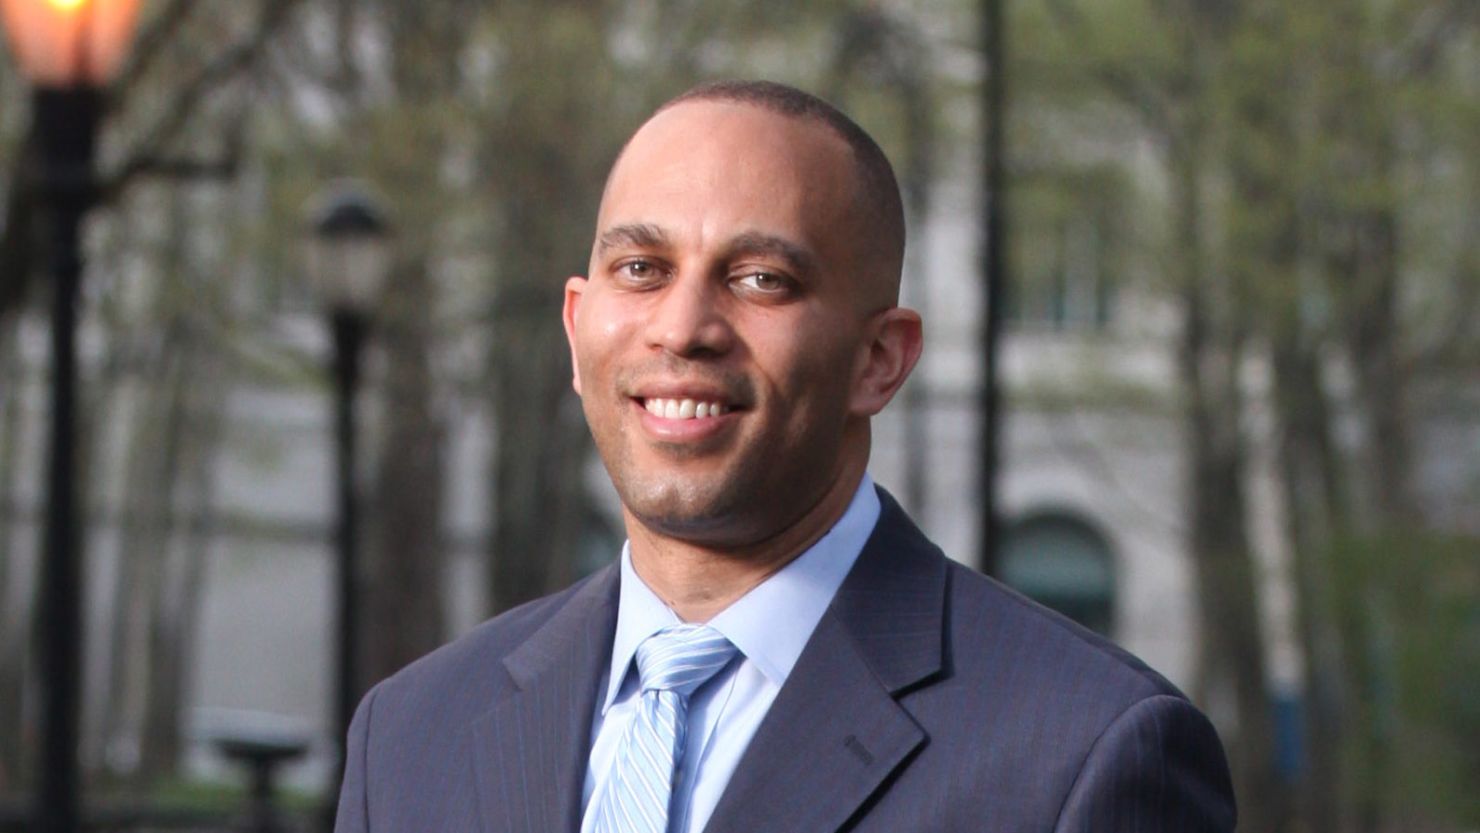 Rep. Hakeem Jeffries, a Democrat from New York, announced Thursday that he'll run for the job of House Democratic Caucus chair, which will be the No. 5 leadership position in the US House of Representatives.